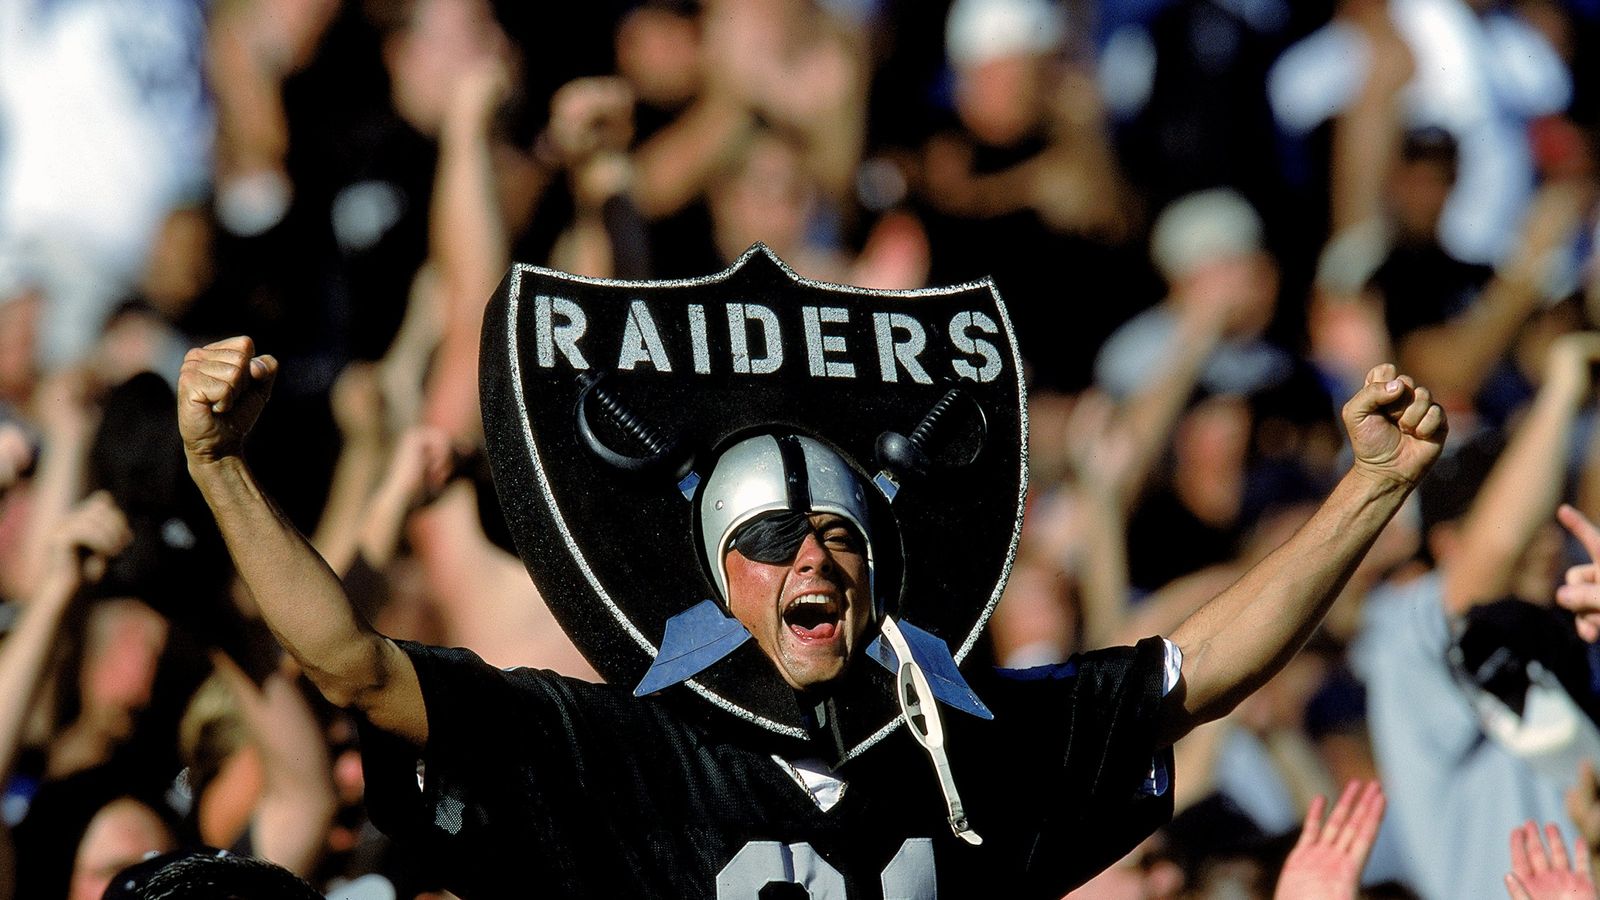 Las Vegas Raiders - Check out the latest photos of Raiders fans